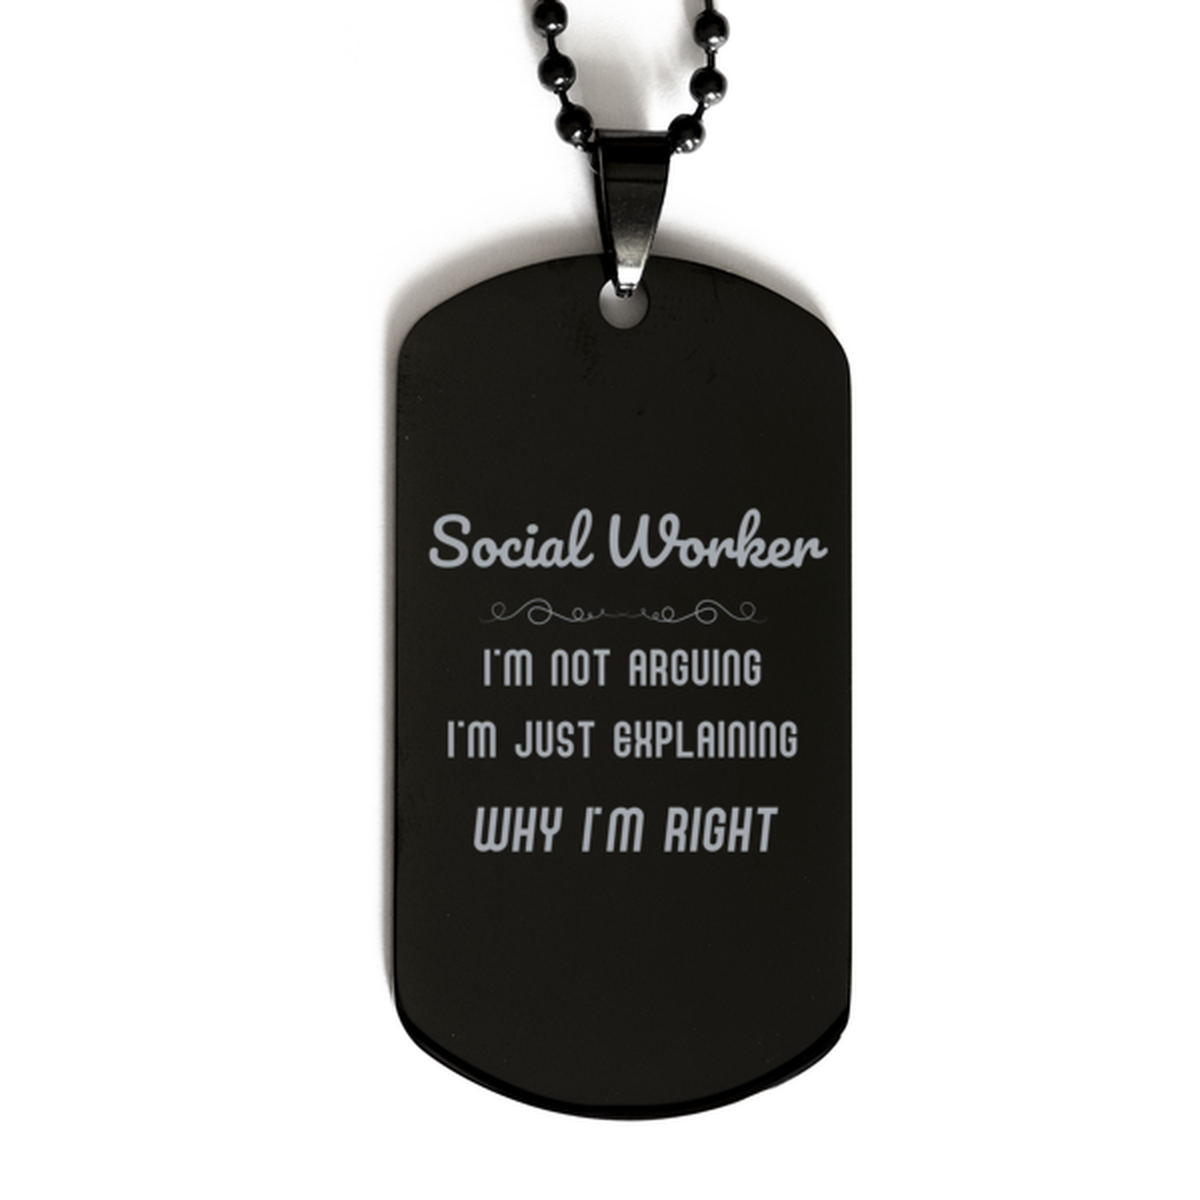 Social Worker I'm not Arguing. I'm Just Explaining Why I'm RIGHT Black Dog Tag, Funny Saying Quote Social Worker Gifts For Social Worker Graduation Birthday Christmas Gifts for Men Women Coworker